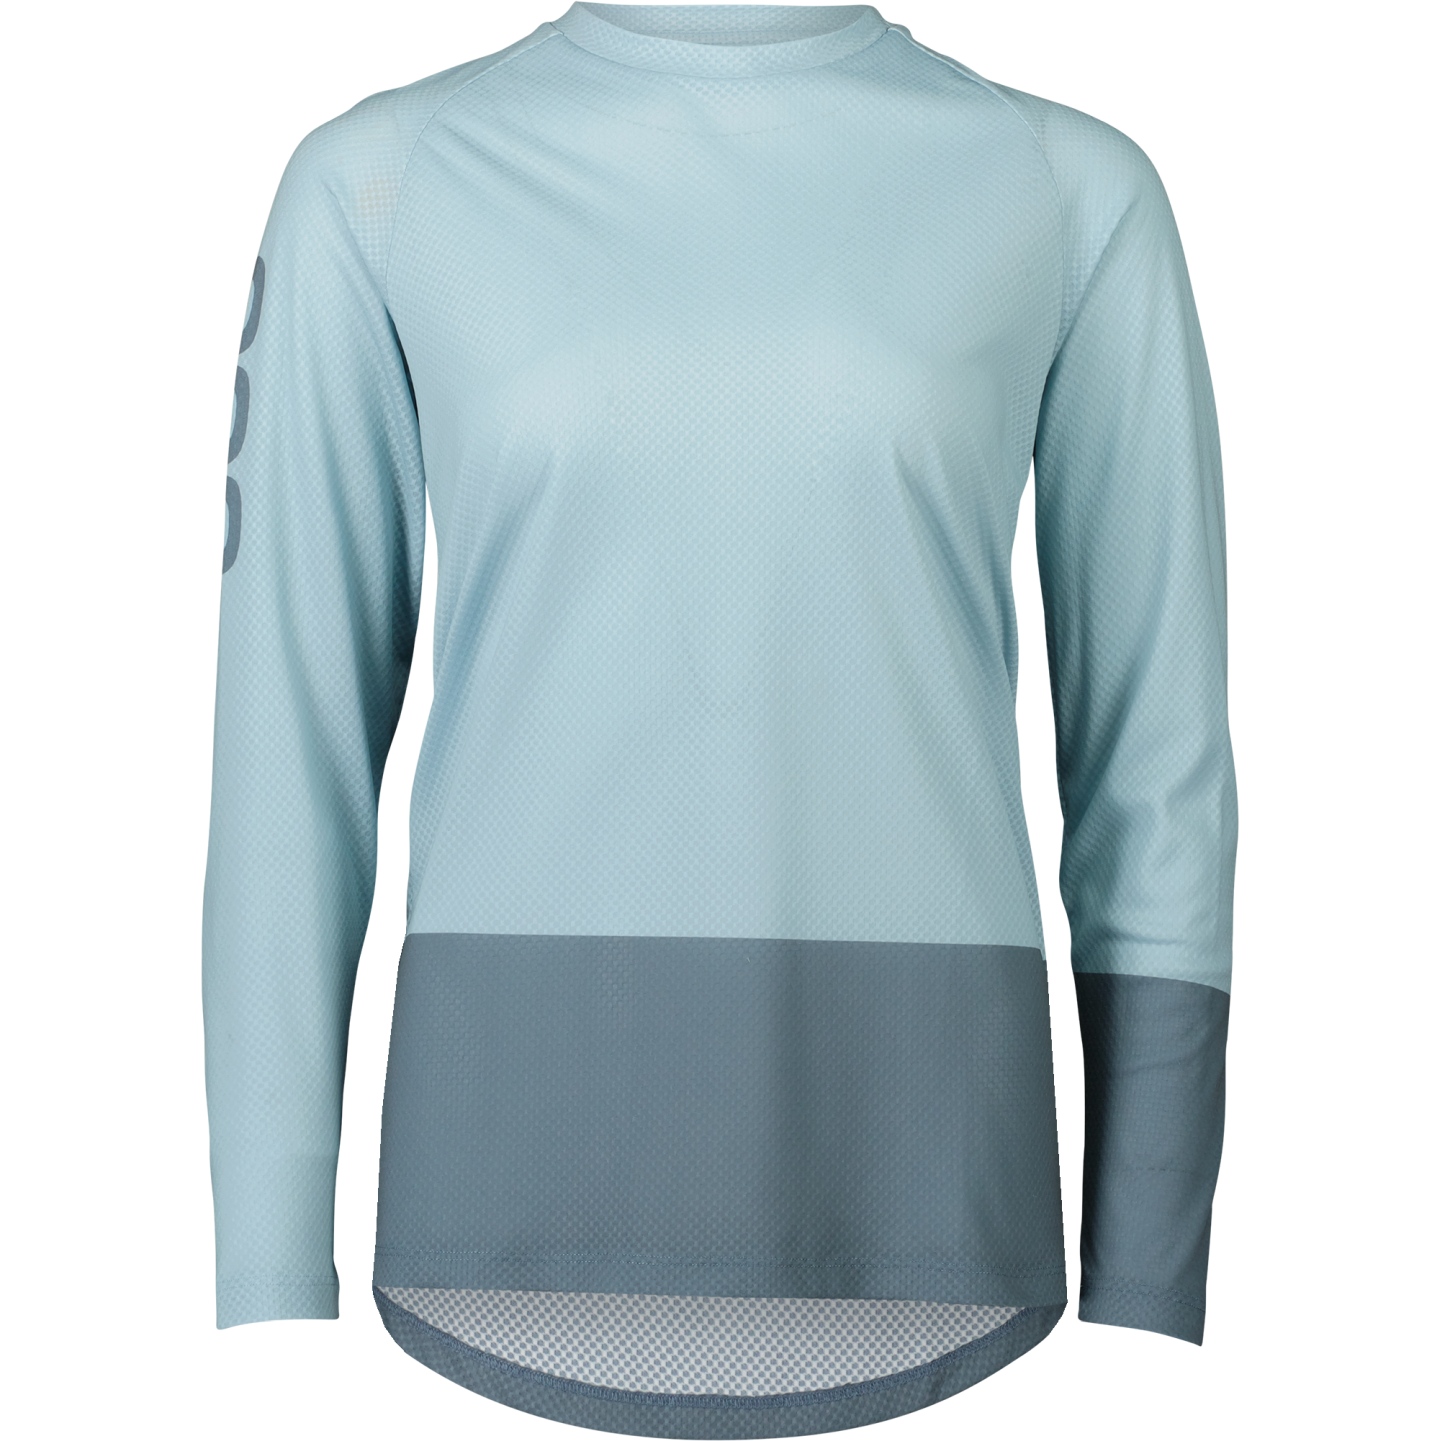 Picture of POC MTB Pure Long Sleeve Jersey Women - 8630 Mineral Blue/Calcite Blue